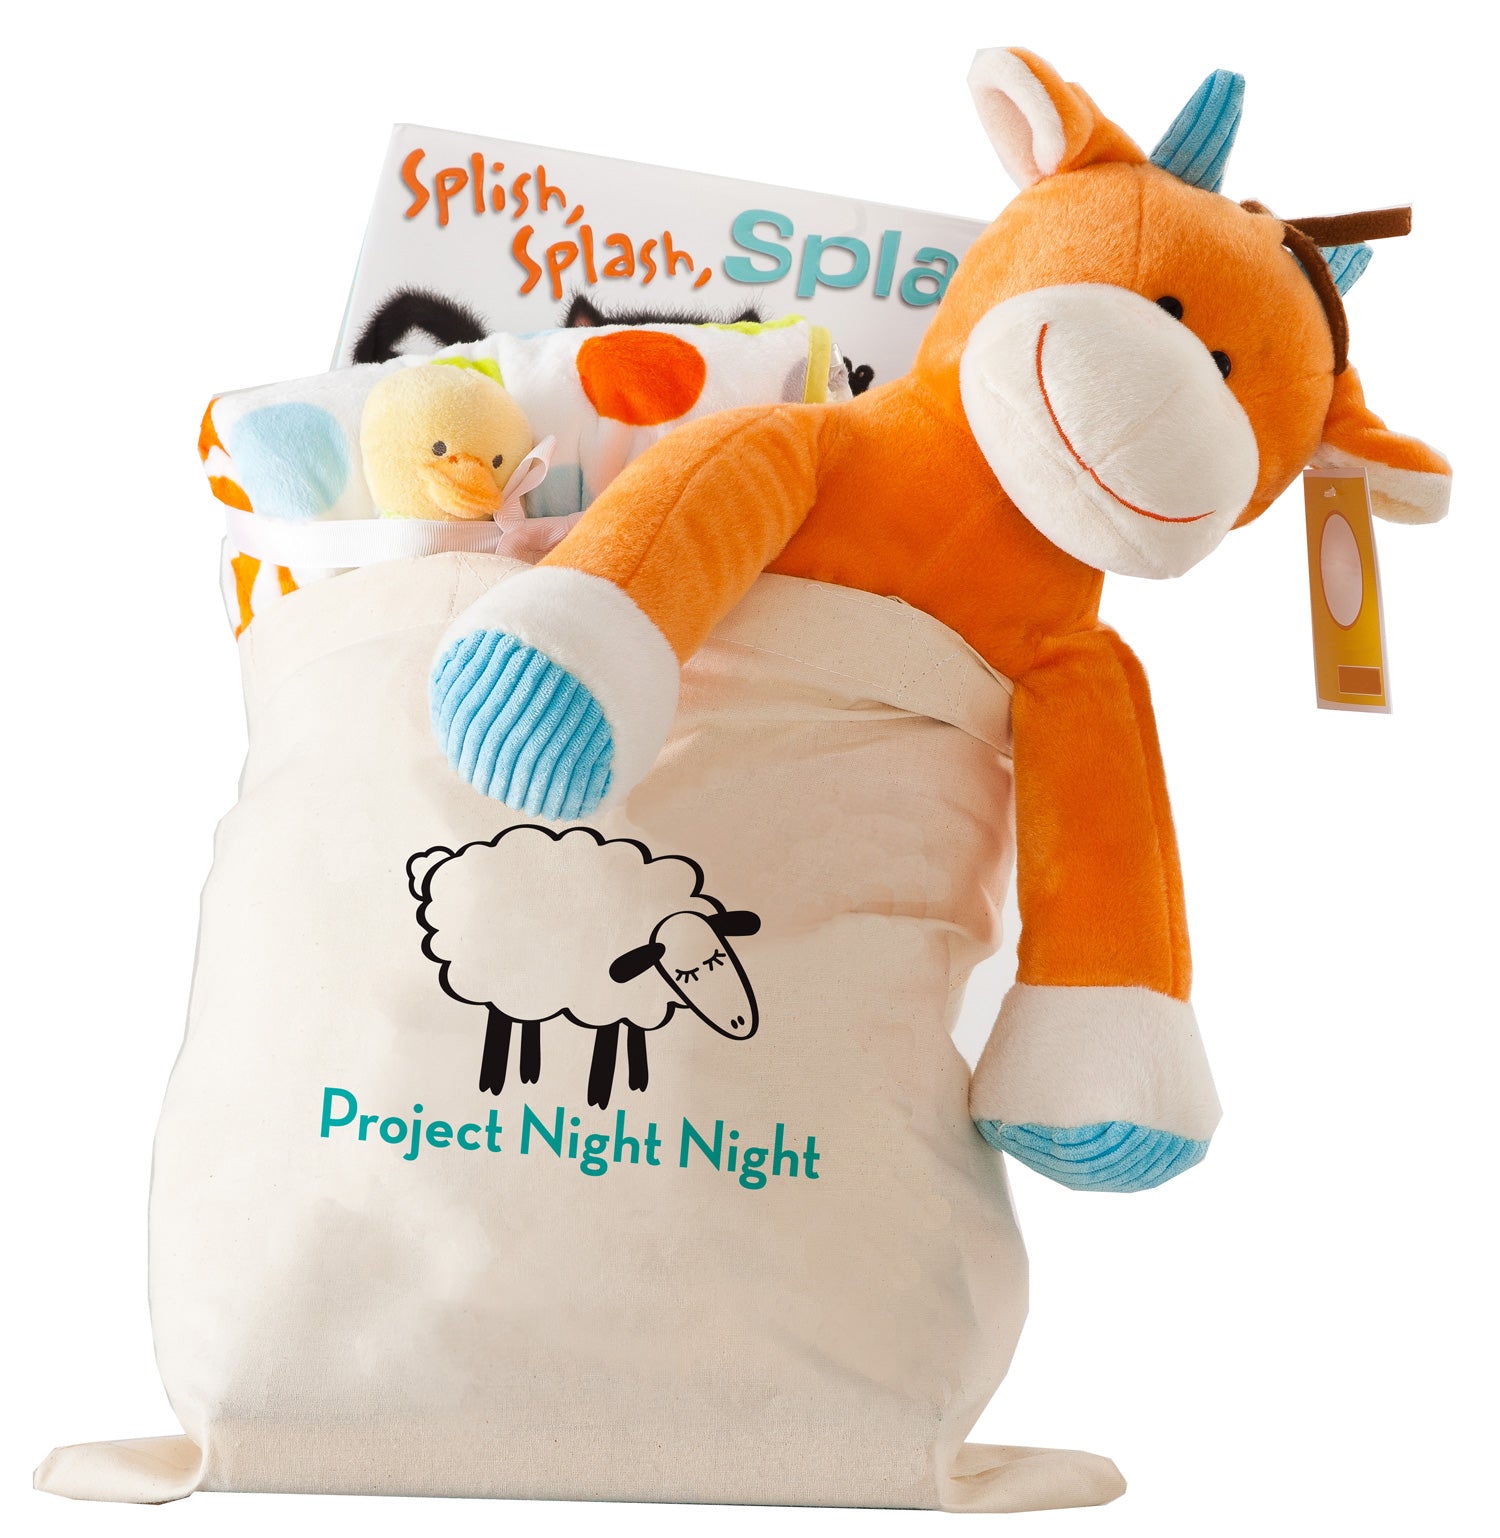 GIVING TUESDAY / PROJECT NIGHT NIGHT